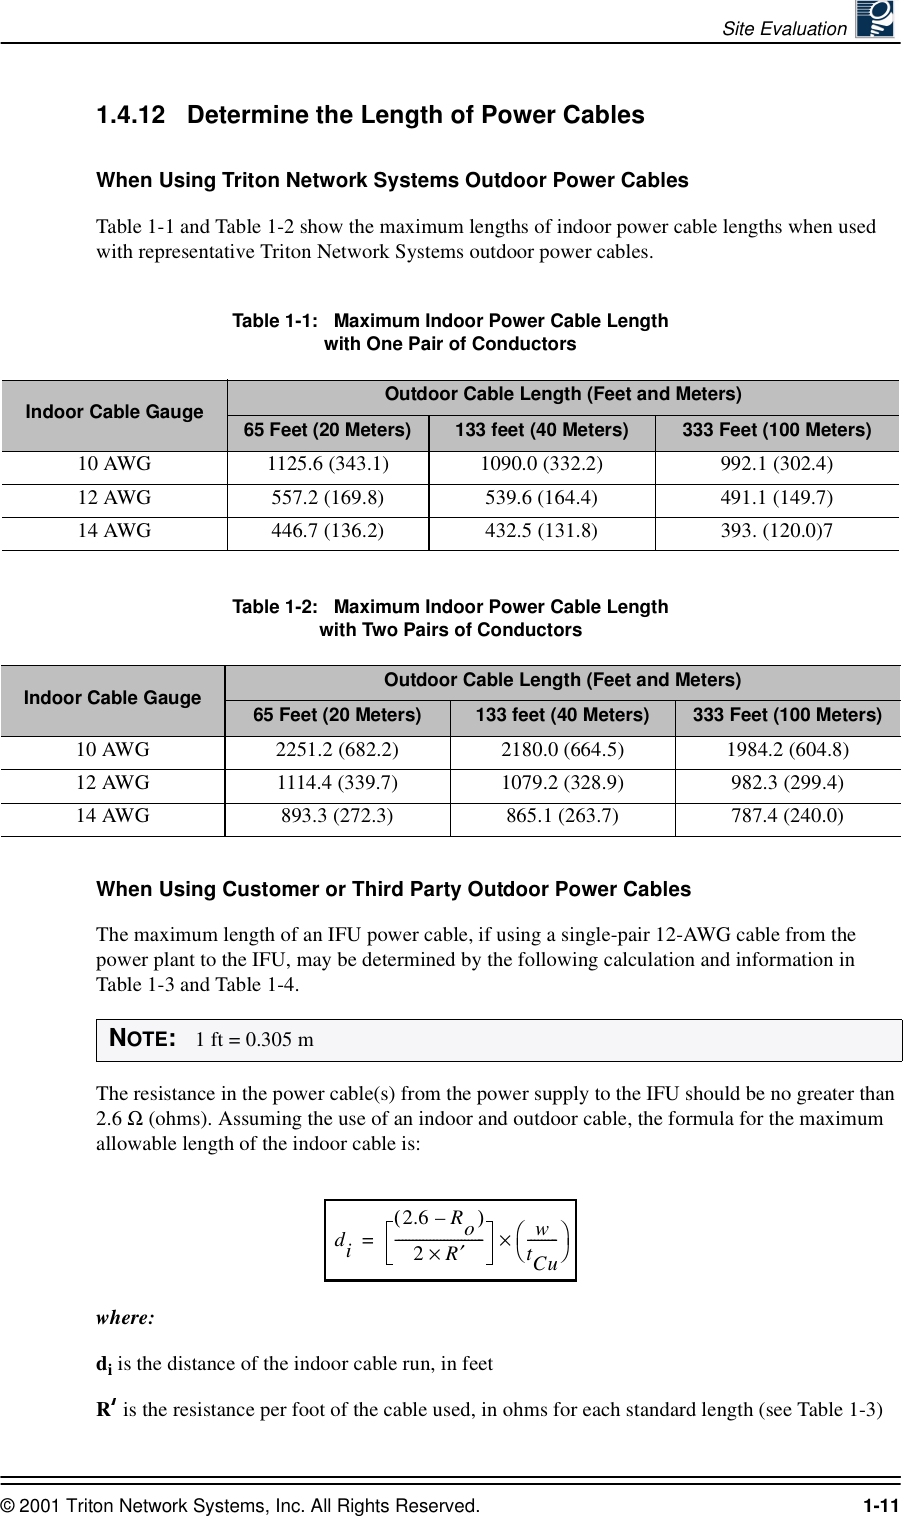 Site Evaluation © 2001 Triton Network Systems, Inc. All Rights Reserved. 1-111.4.12 Determine the Length of Power CablesWhen Using Triton Network Systems Outdoor Power CablesTable 1-1 and Table 1-2 show the maximum lengths of indoor power cable lengths when used with representative Triton Network Systems outdoor power cables.Table 1-1:   Maximum Indoor Power Cable Length  with One Pair of ConductorsTable 1-2:   Maximum Indoor Power Cable Length  with Two Pairs of ConductorsWhen Using Customer or Third Party Outdoor Power CablesThe maximum length of an IFU power cable, if using a single-pair 12-AWG cable from the power plant to the IFU, may be determined by the following calculation and information in Table 1-3 and Table 1-4.The resistance in the power cable(s) from the power supply to the IFU should be no greater than 2.6 Ω (ohms). Assuming the use of an indoor and outdoor cable, the formula for the maximum allowable length of the indoor cable is:where:di is the distance of the indoor cable run, in feetR is the resistance per foot of the cable used, in ohms for each standard length (see Table 1-3)Indoor Cable Gauge Outdoor Cable Length (Feet and Meters)65 Feet (20 Meters)  133 feet (40 Meters) 333 Feet (100 Meters)10 AWG 1125.6 (343.1) 1090.0 (332.2) 992.1 (302.4)12 AWG 557.2 (169.8) 539.6 (164.4) 491.1 (149.7)14 AWG 446.7 (136.2) 432.5 (131.8) 393. (120.0)7Indoor Cable Gauge Outdoor Cable Length (Feet and Meters)65 Feet (20 Meters)  133 feet (40 Meters) 333 Feet (100 Meters)10 AWG 2251.2 (682.2) 2180.0 (664.5) 1984.2 (604.8)12 AWG 1114.4 (339.7) 1079.2 (328.9) 982.3 (299.4)14 AWG 893.3 (272.3) 865.1 (263.7) 787.4 (240.0)NOTE:   1 ft = 0.305 mdi2.6(Ro)–2R×′--------------------------wtCu---------×=